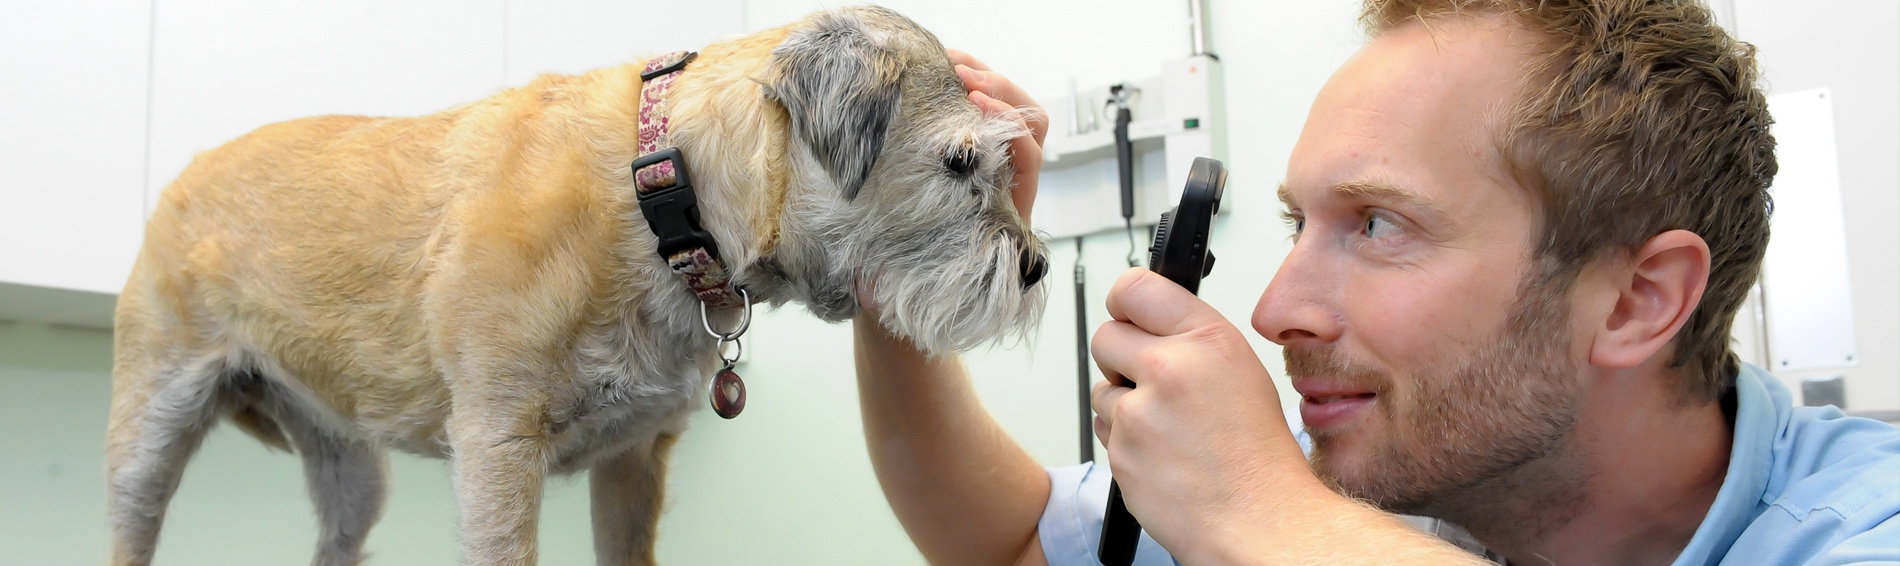 Vaccinations | Spinney Vets Northampton 